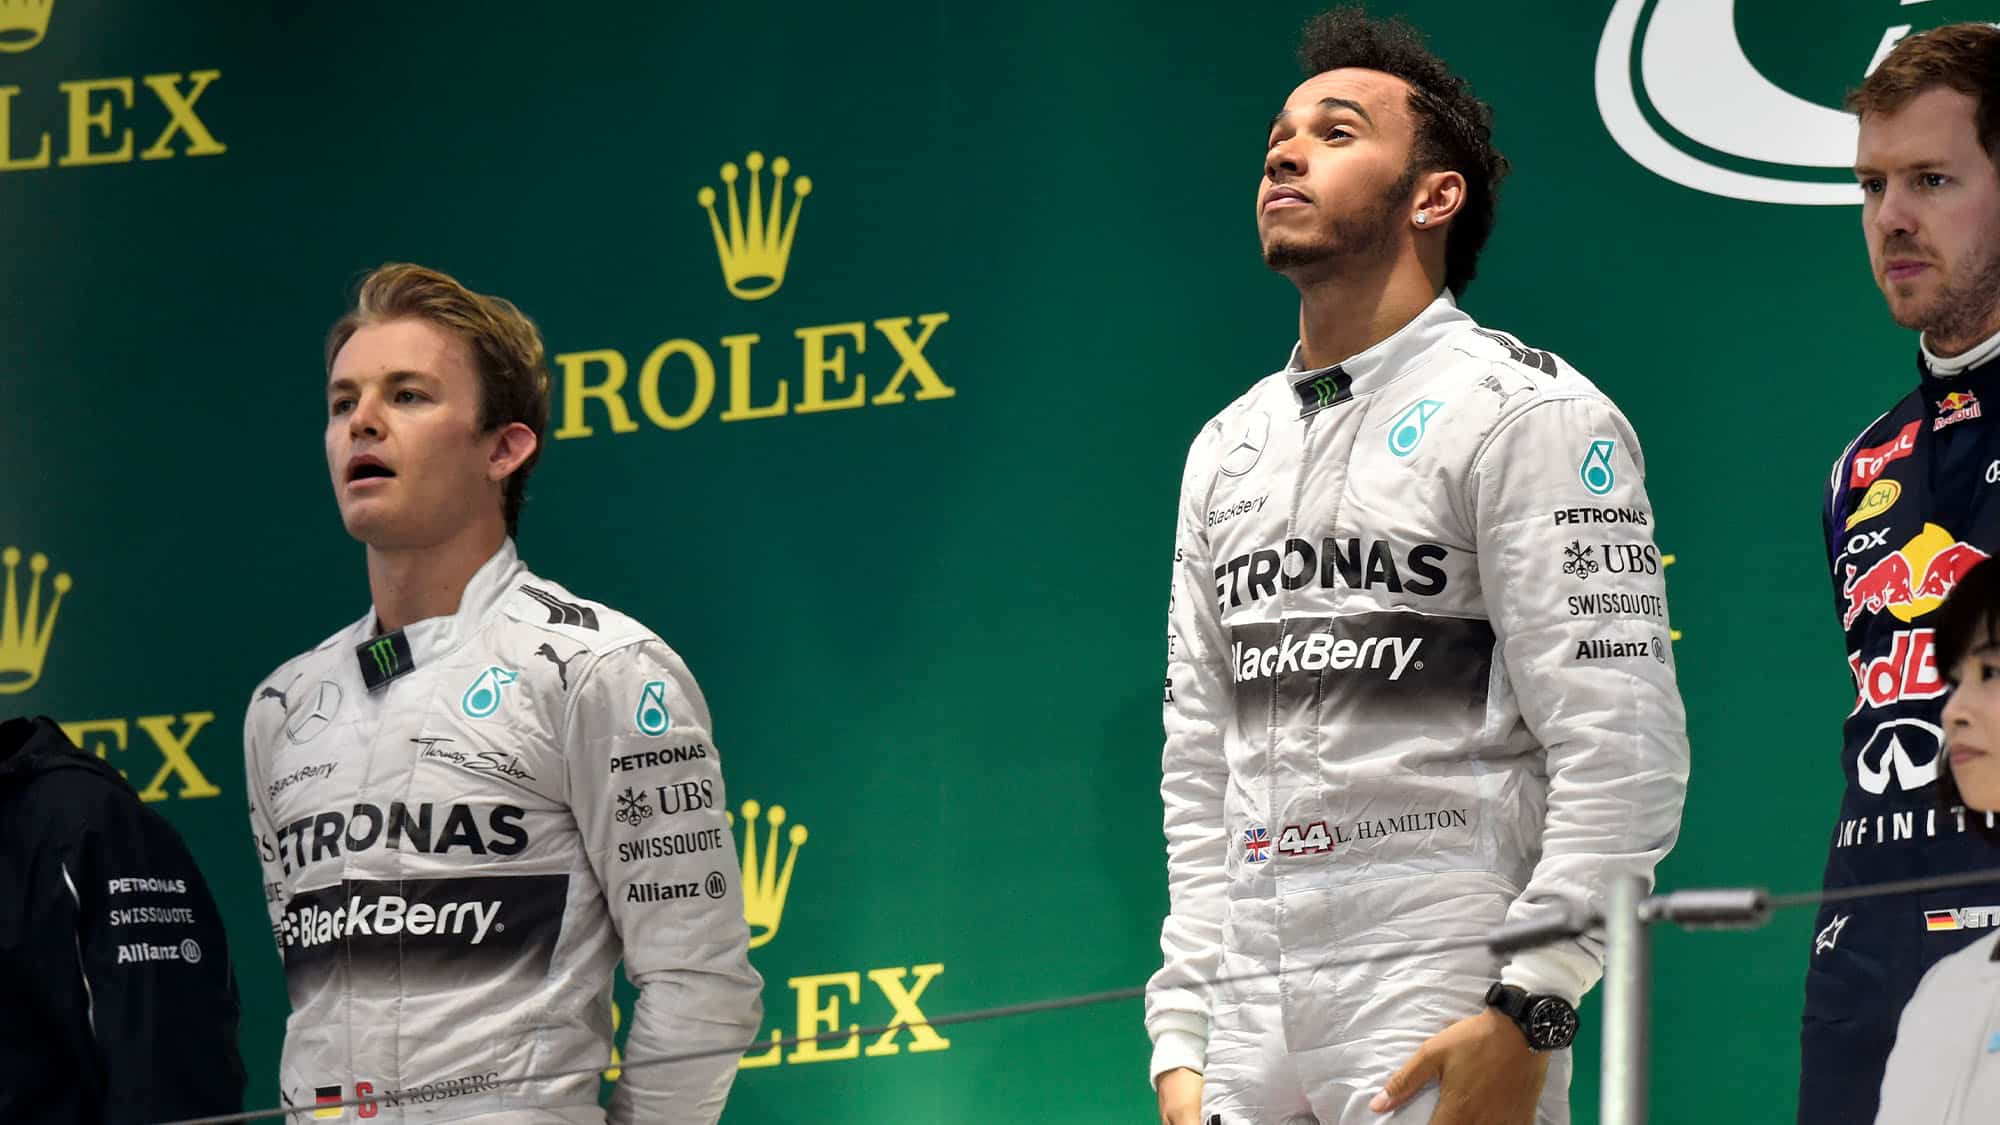 Lewis Hamilton on the podium with Rosberg and Vettel at the 2014 Japanese Grand Prix